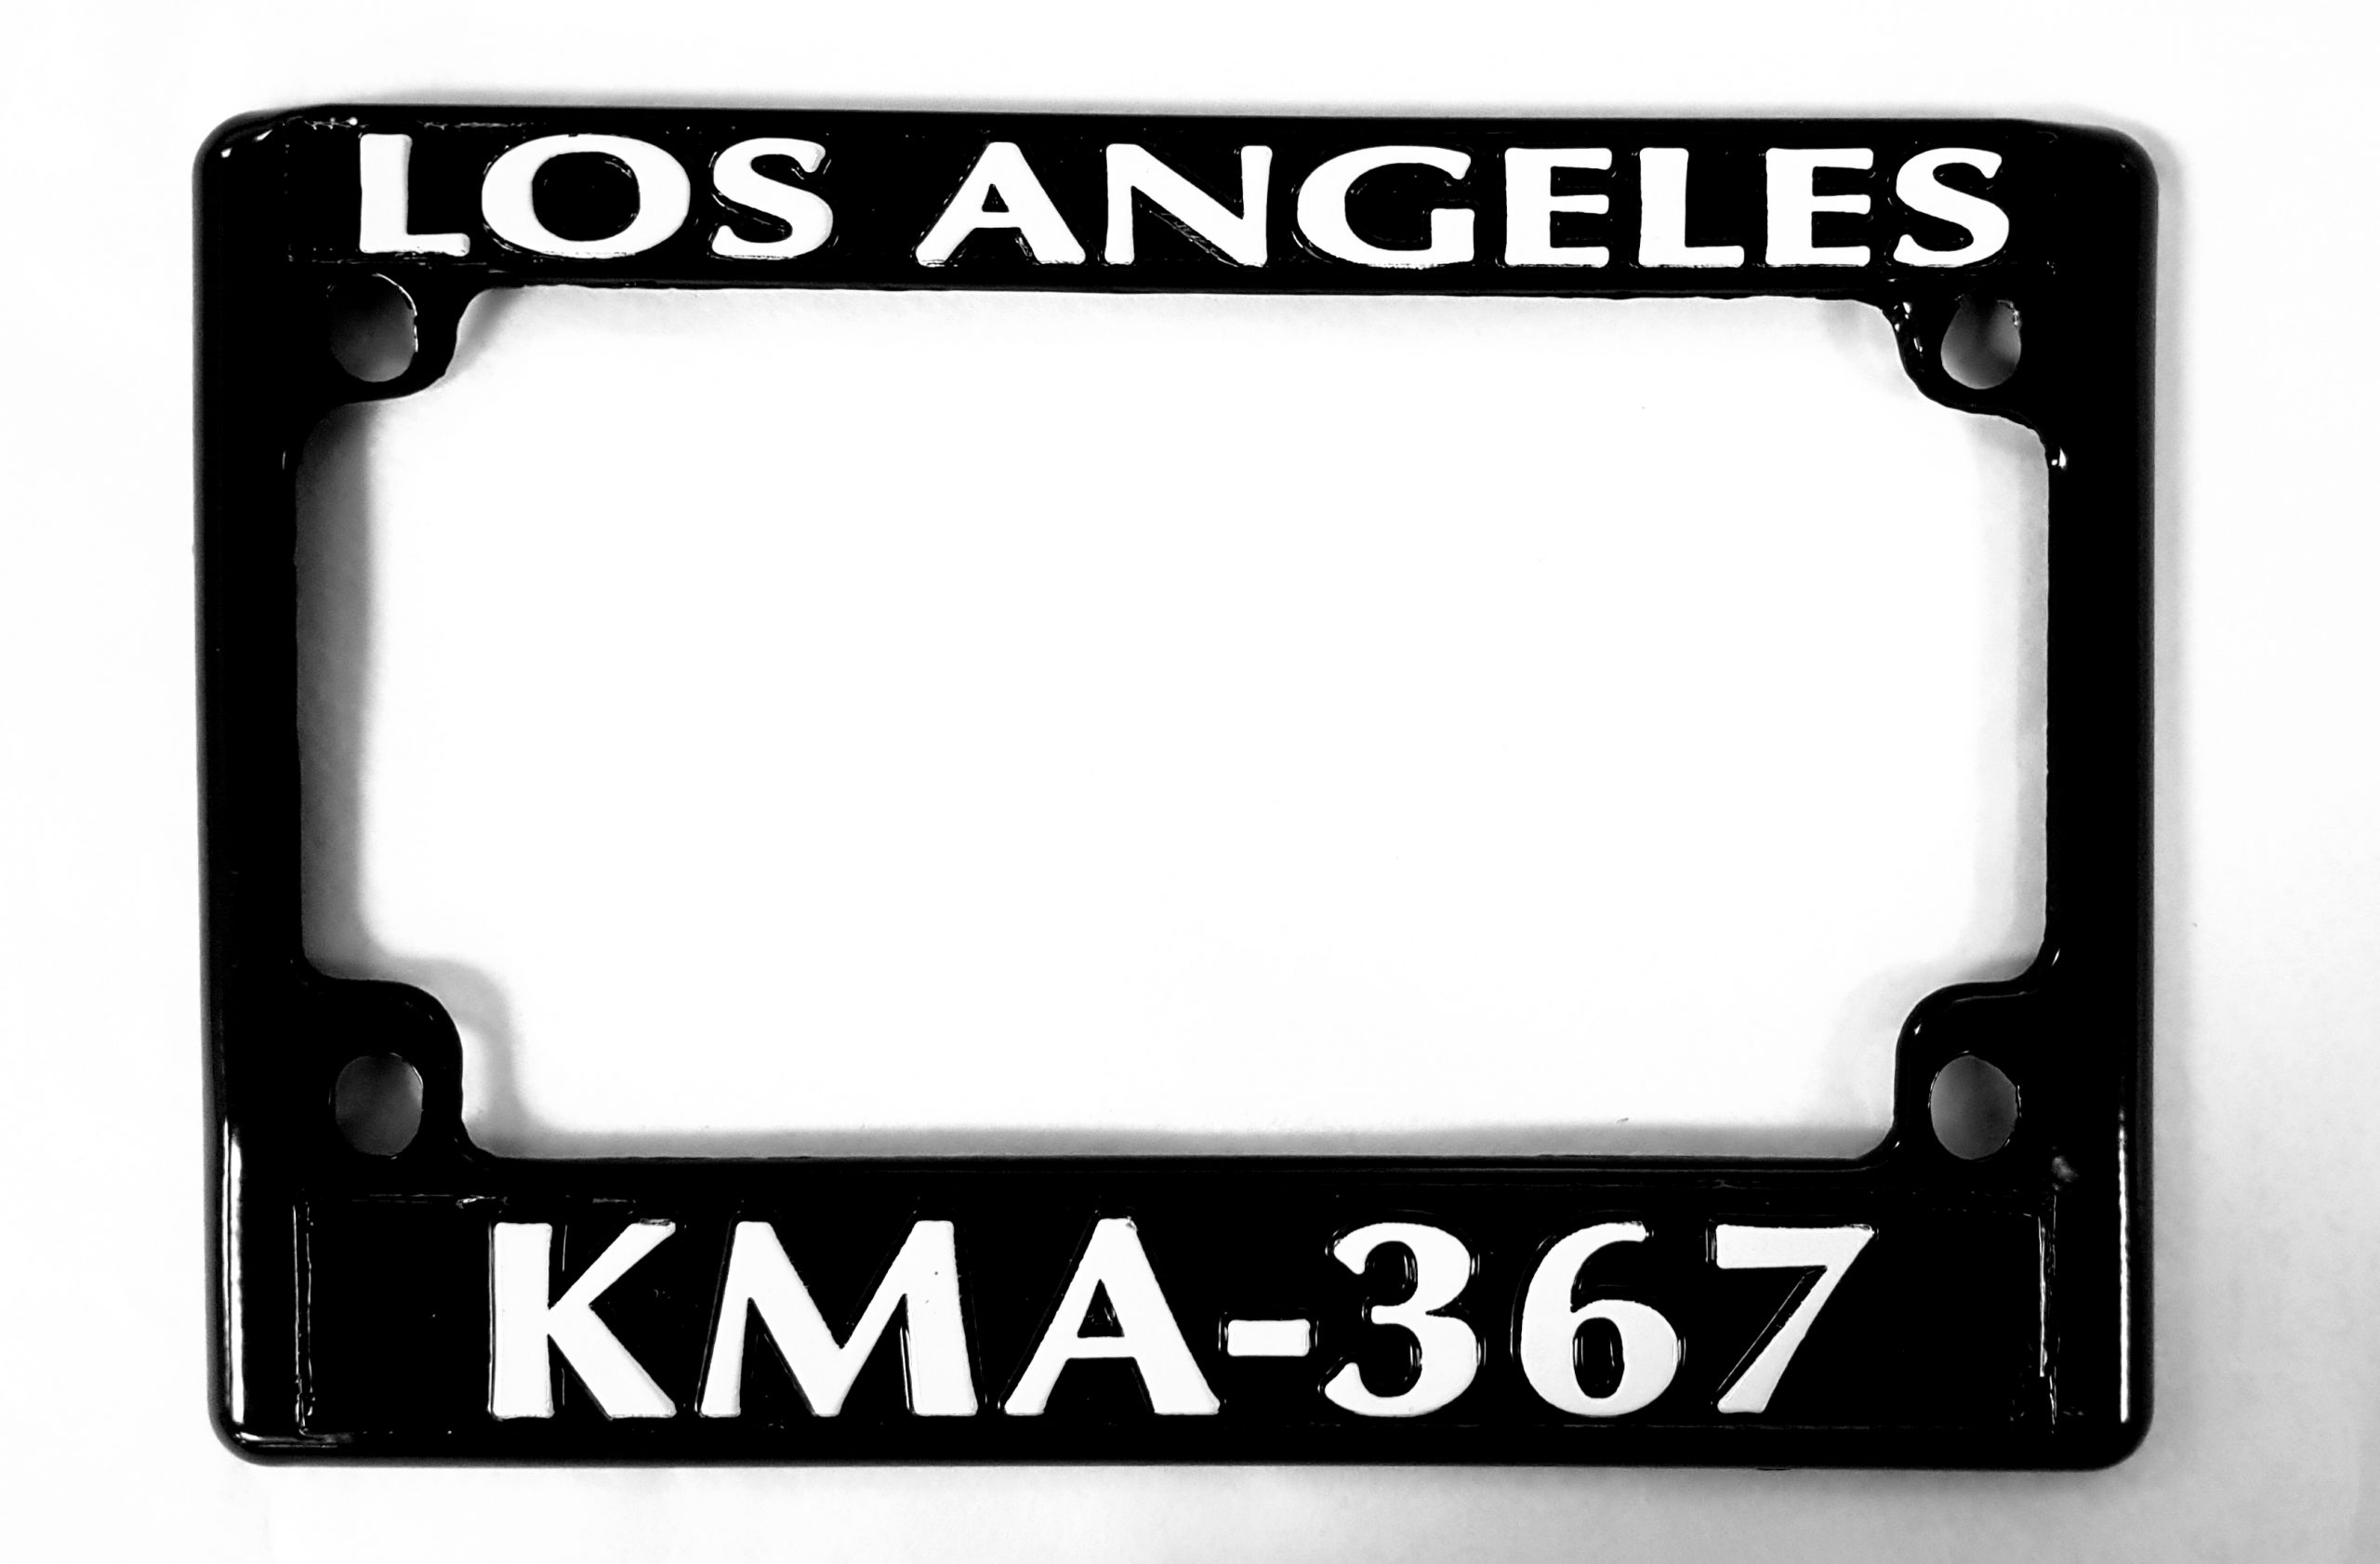 New. BLACK Metal LOS ANGELES PD KMA-367 MOTORCYCLE LICENSE PLATE FRAME